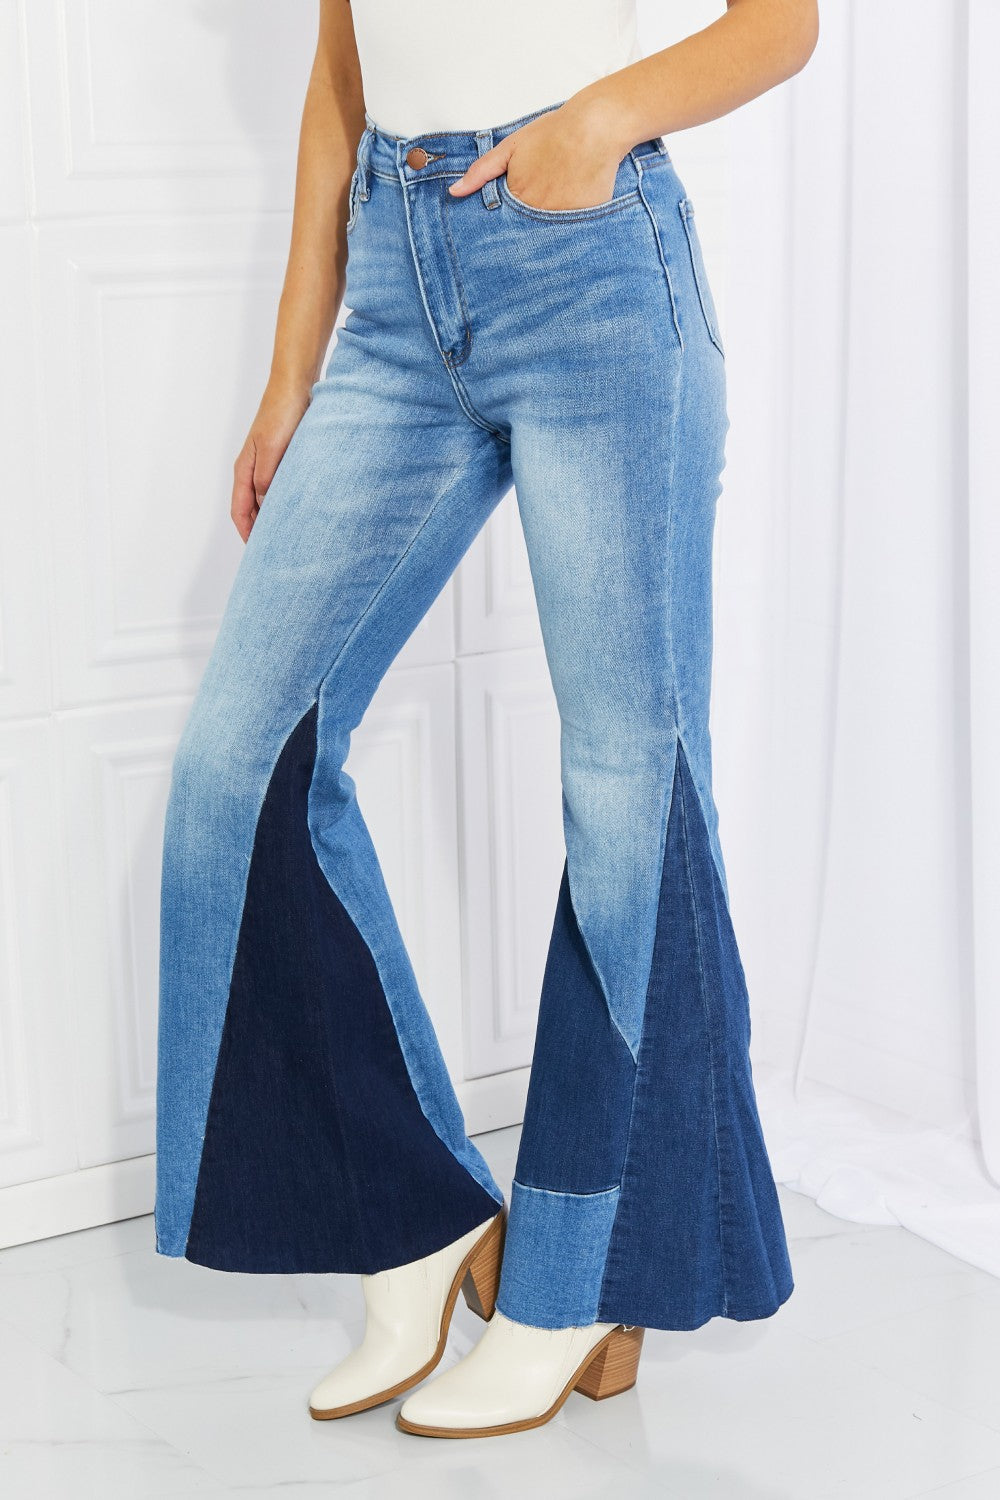 Vibrant Sienna Color Block Flare Jeans